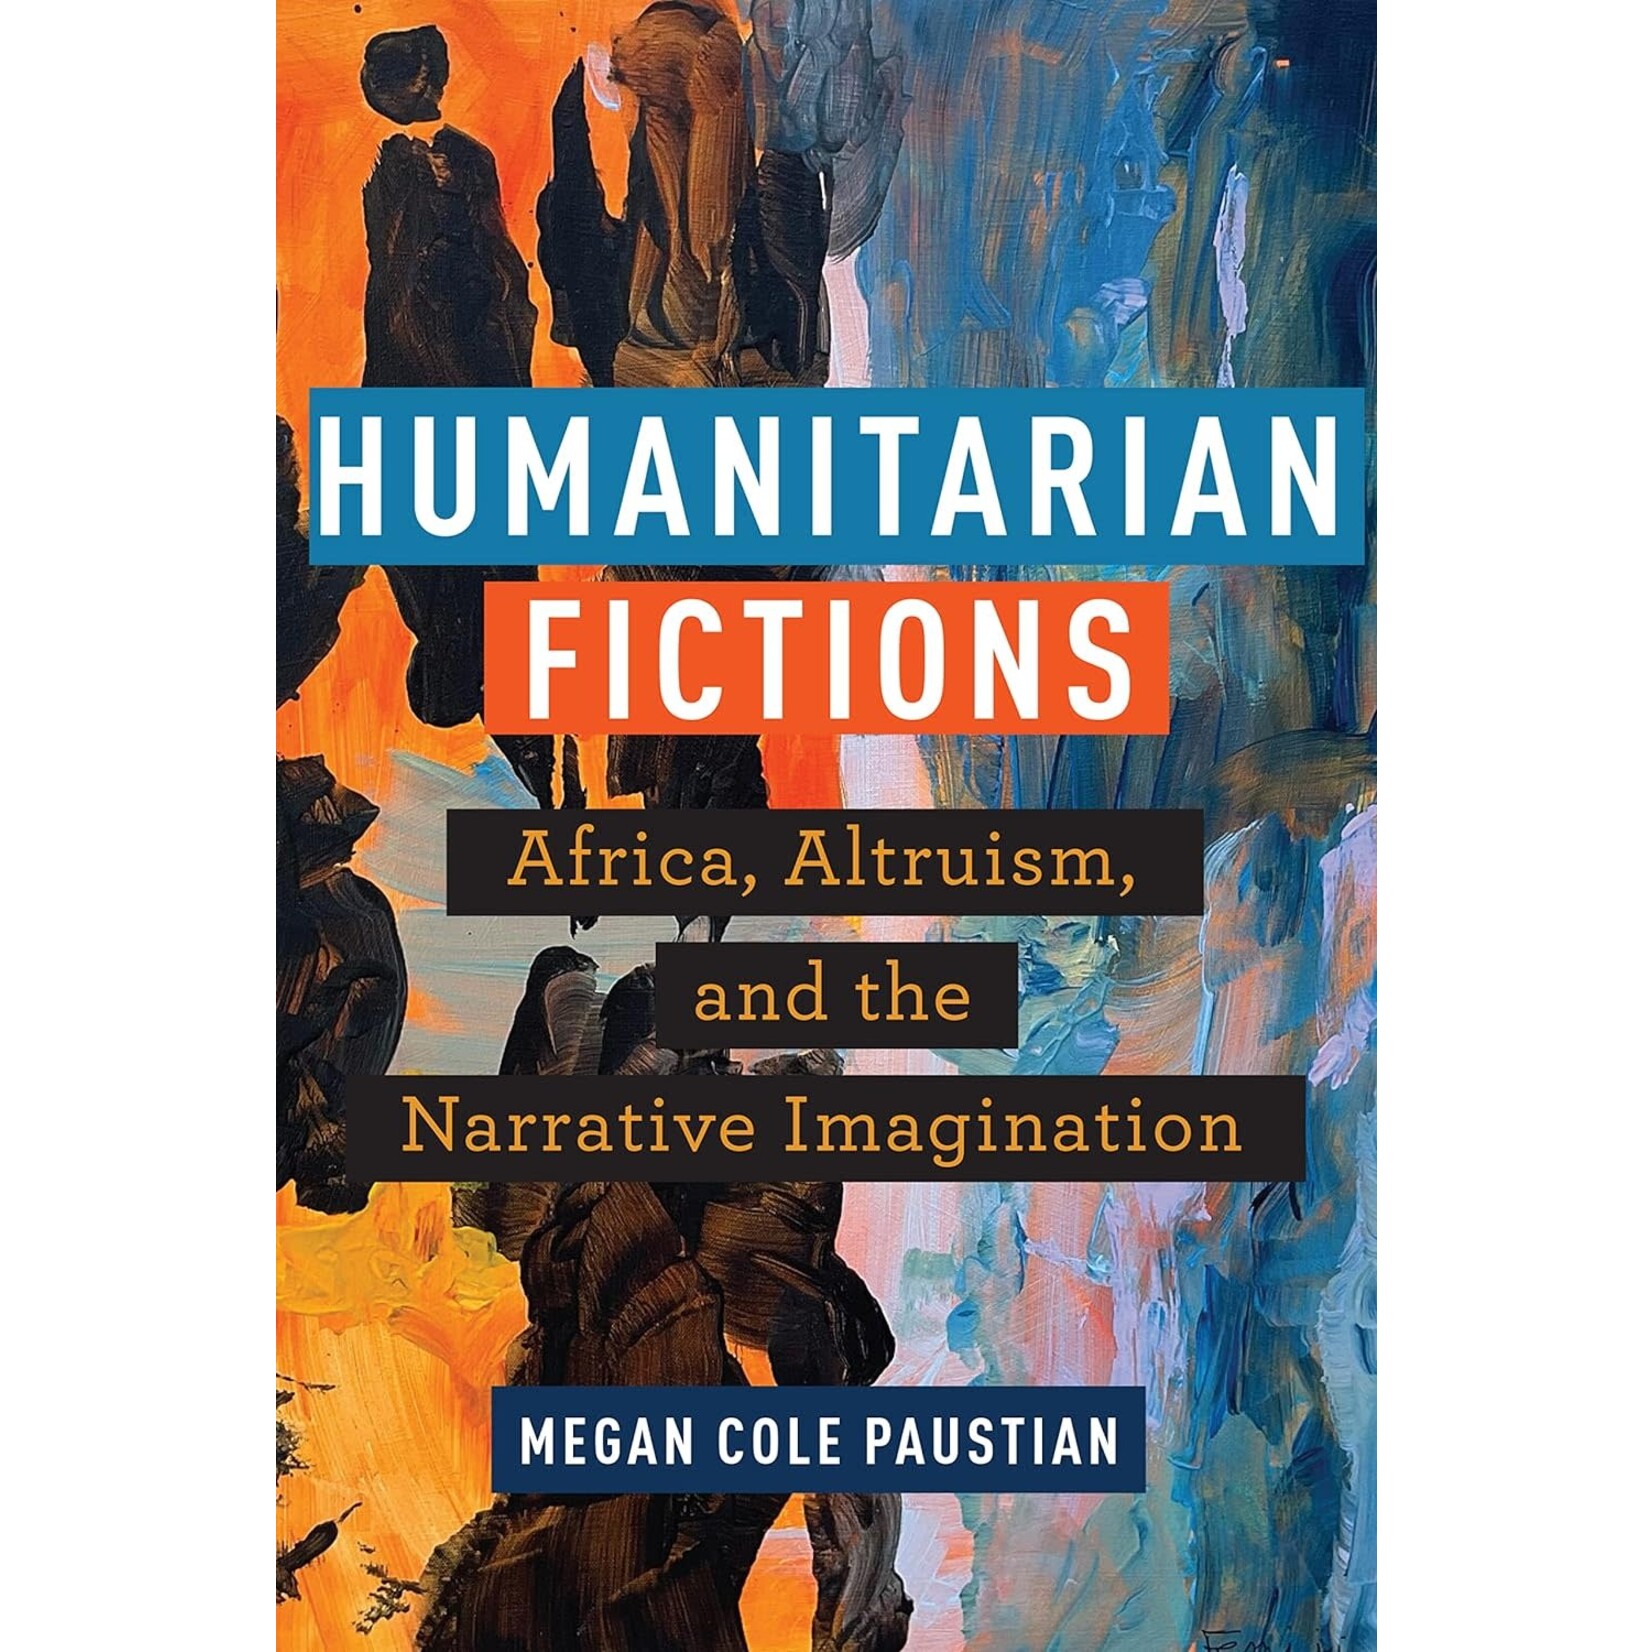 Humanitarian Fictions, Africa, Altruism, and the Narrative Imagination by Megan Cole Paustian